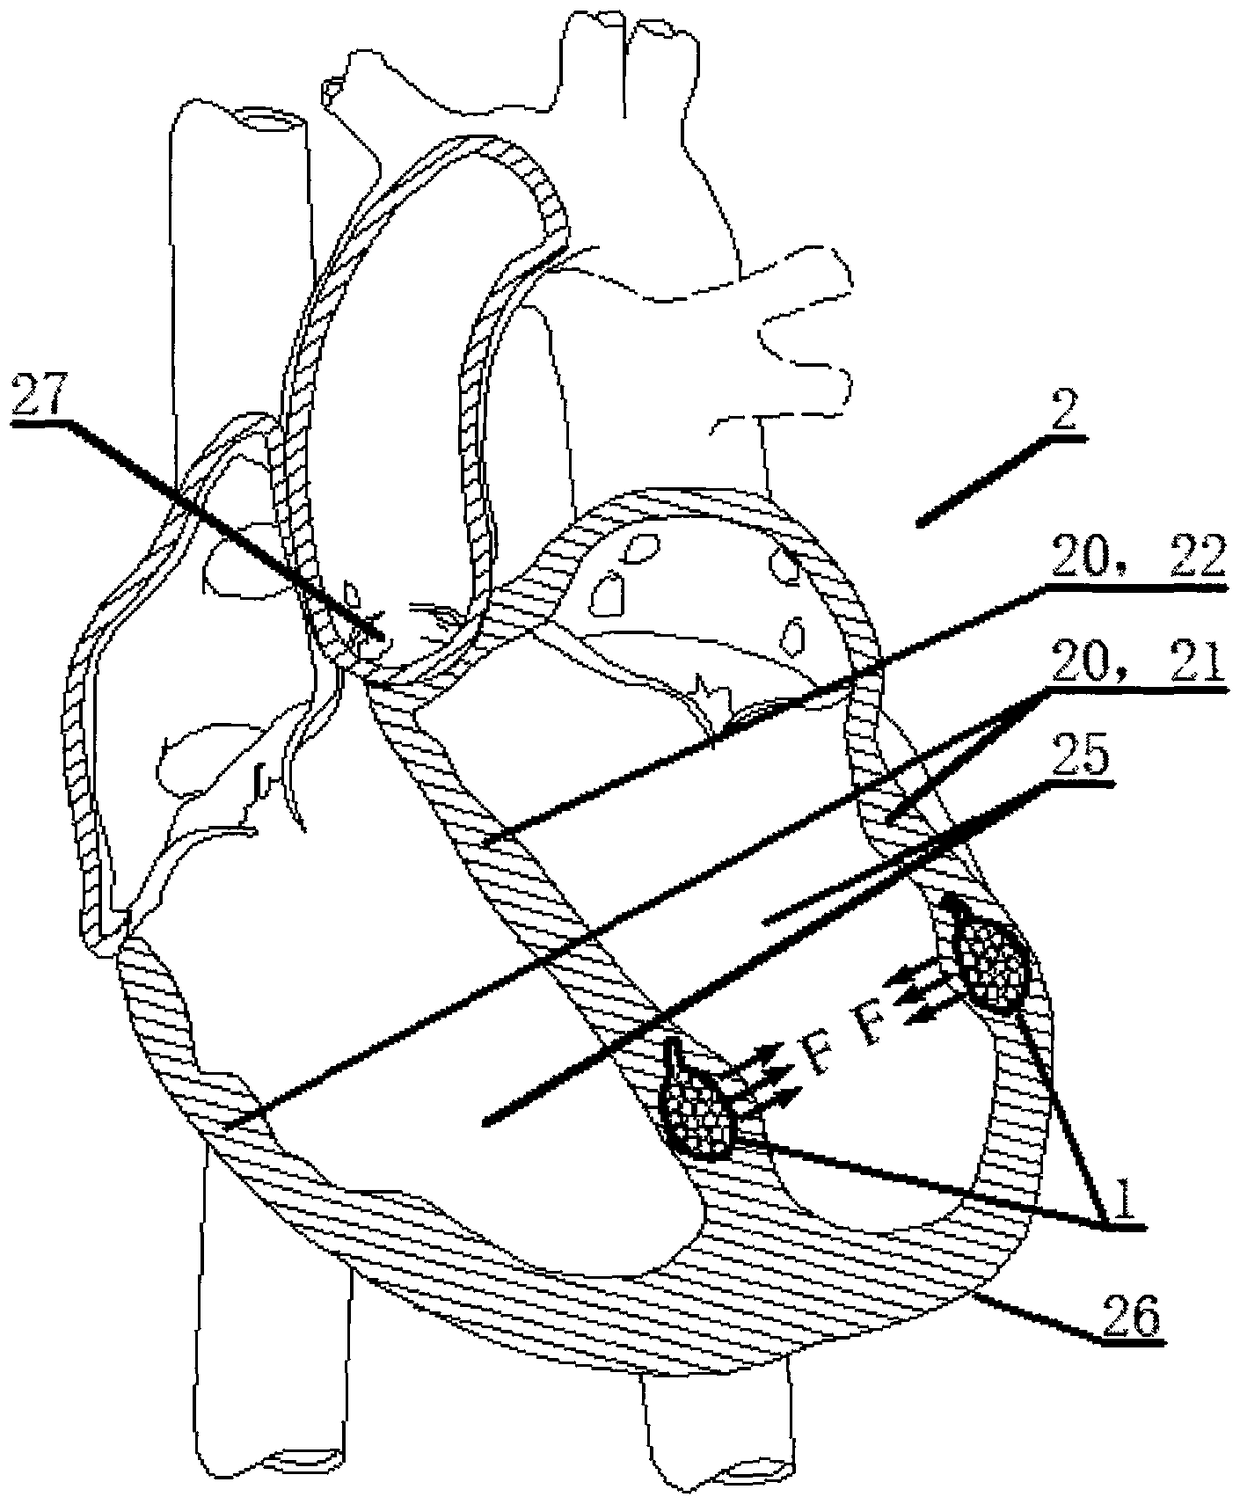 Ventricle assisting device implanted through interventional micro-injury operation